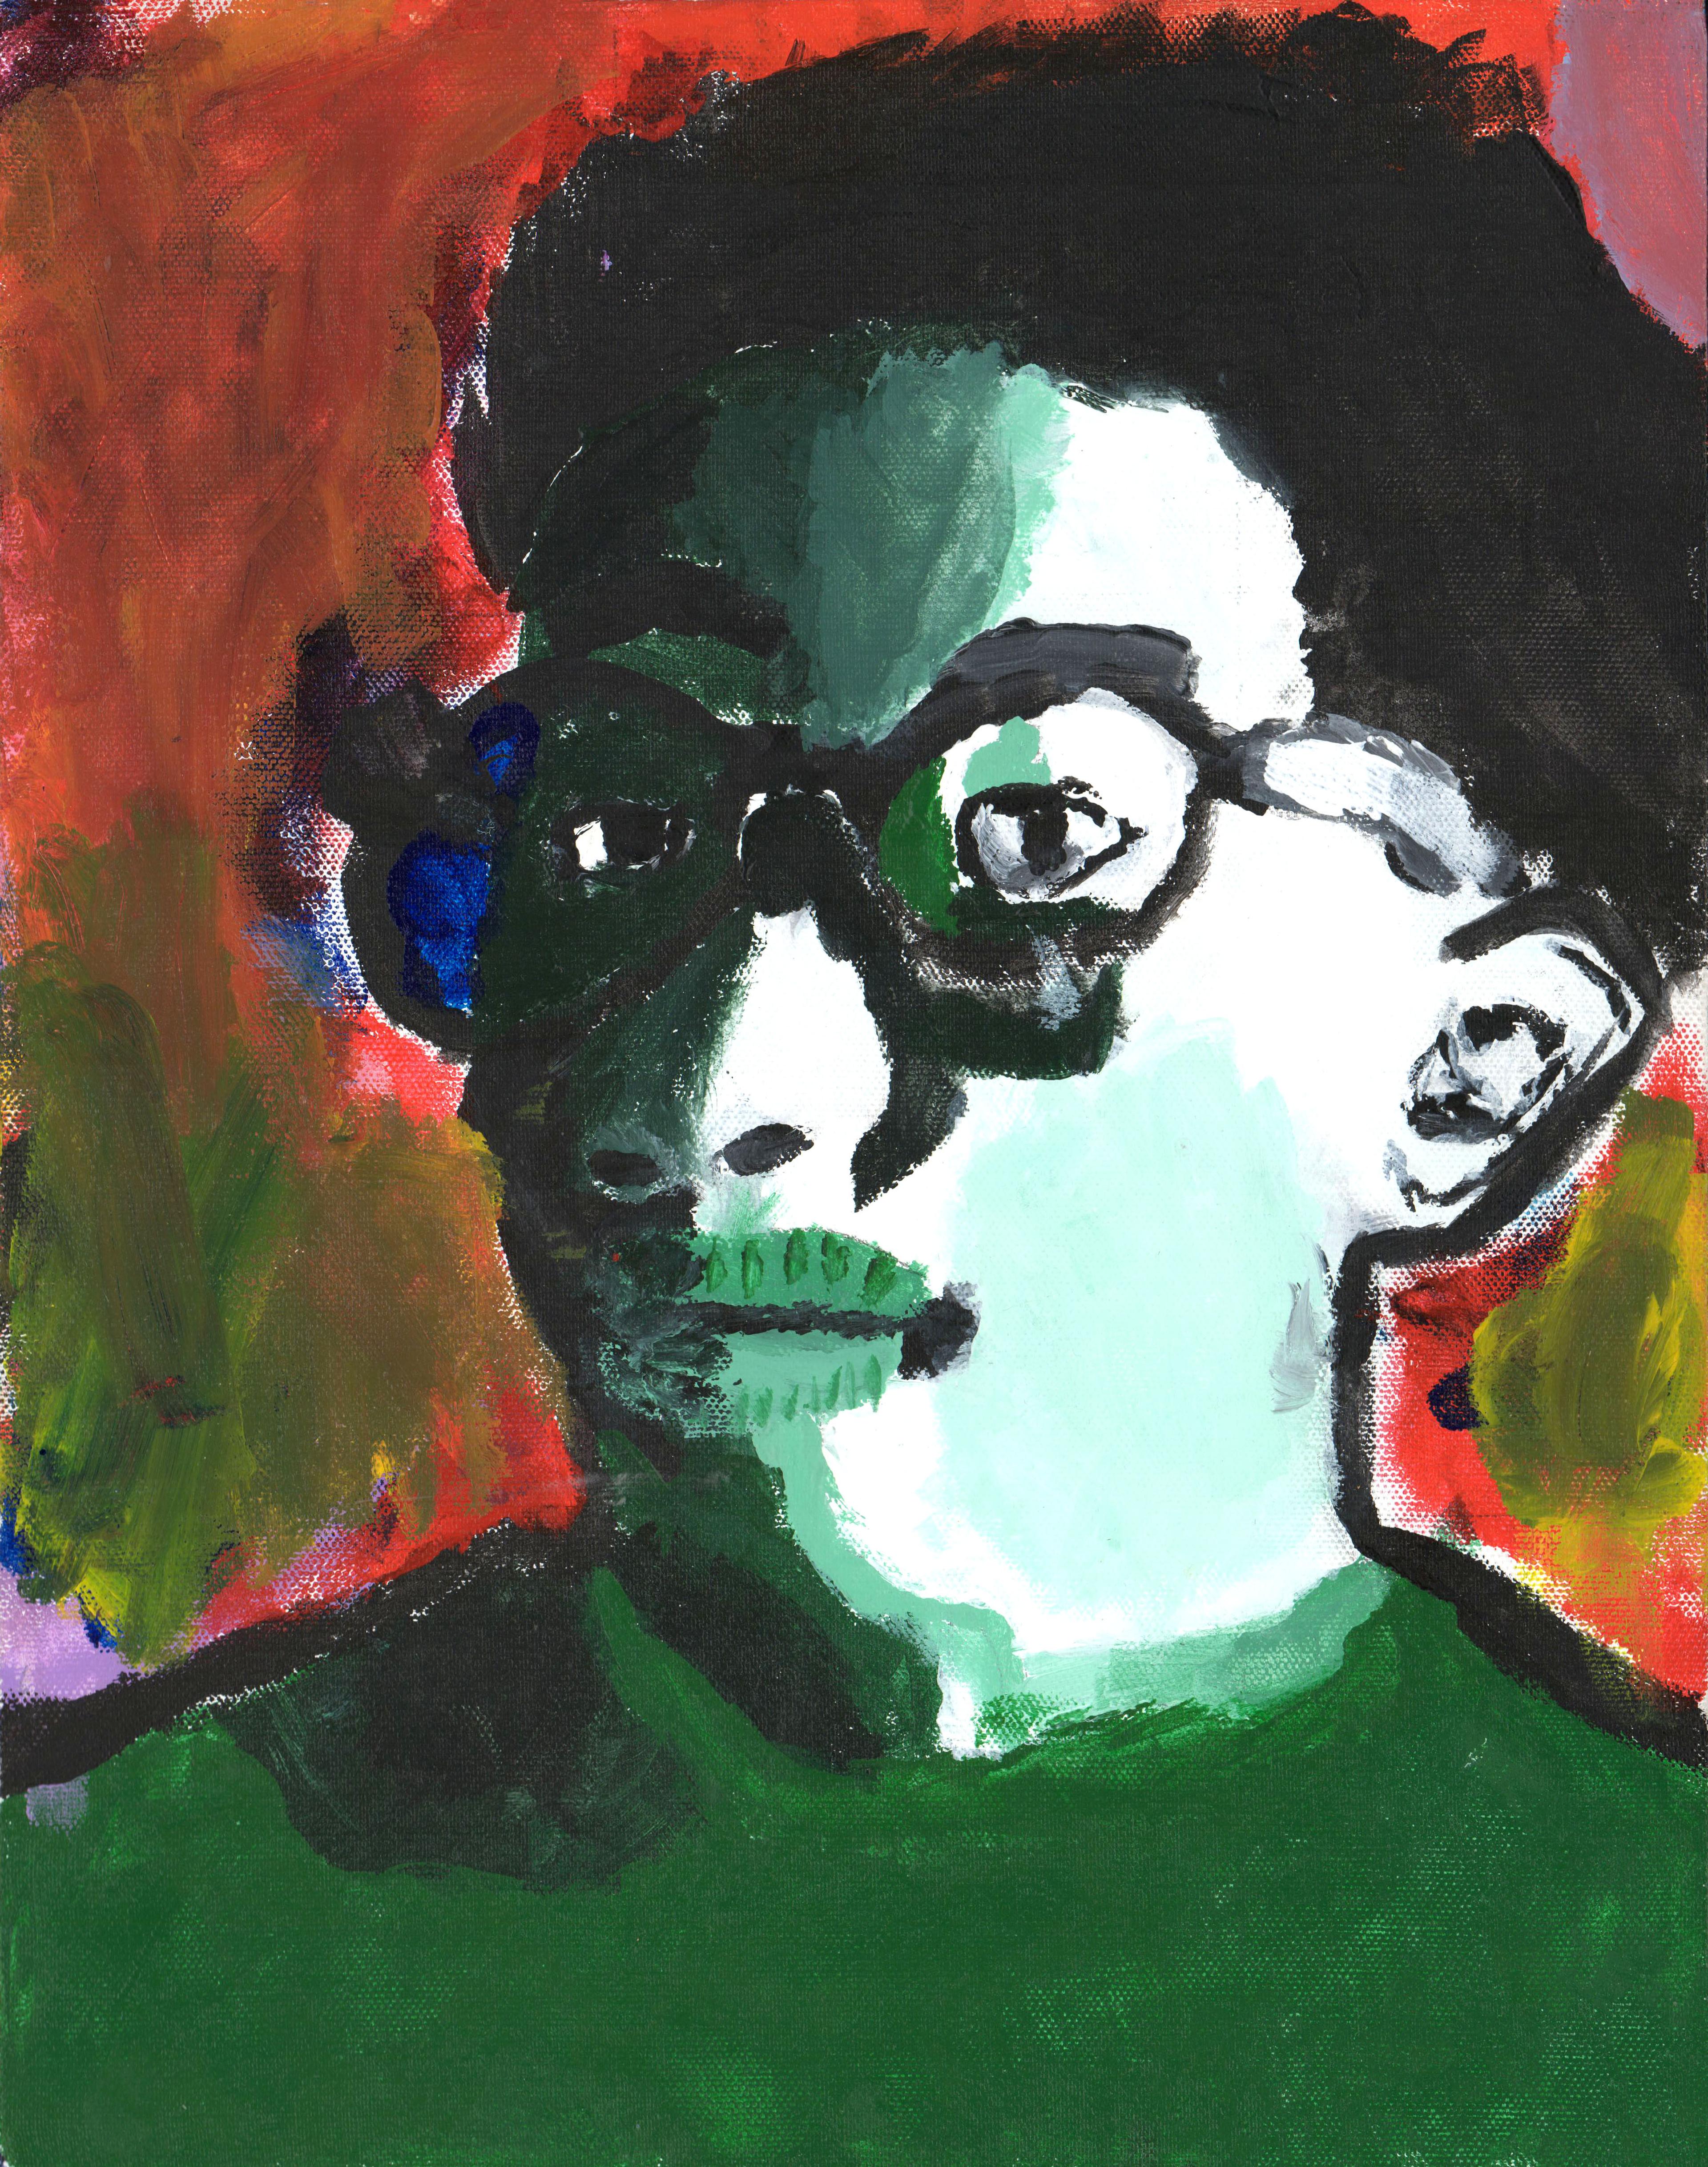 Acrylic-on-canvas self-portrait of an adolescent boy facing left but looking at the viewer with his eyes. He has dark, thick hair and black framed glasses. The right side of his face is cloaked in dark green shadow, and the left side of his face is nearly white from bright illumination. He wears a green shirt, and the background is a dark contrasting red, with a green splotch on the left side and a yellow splotch on the right.